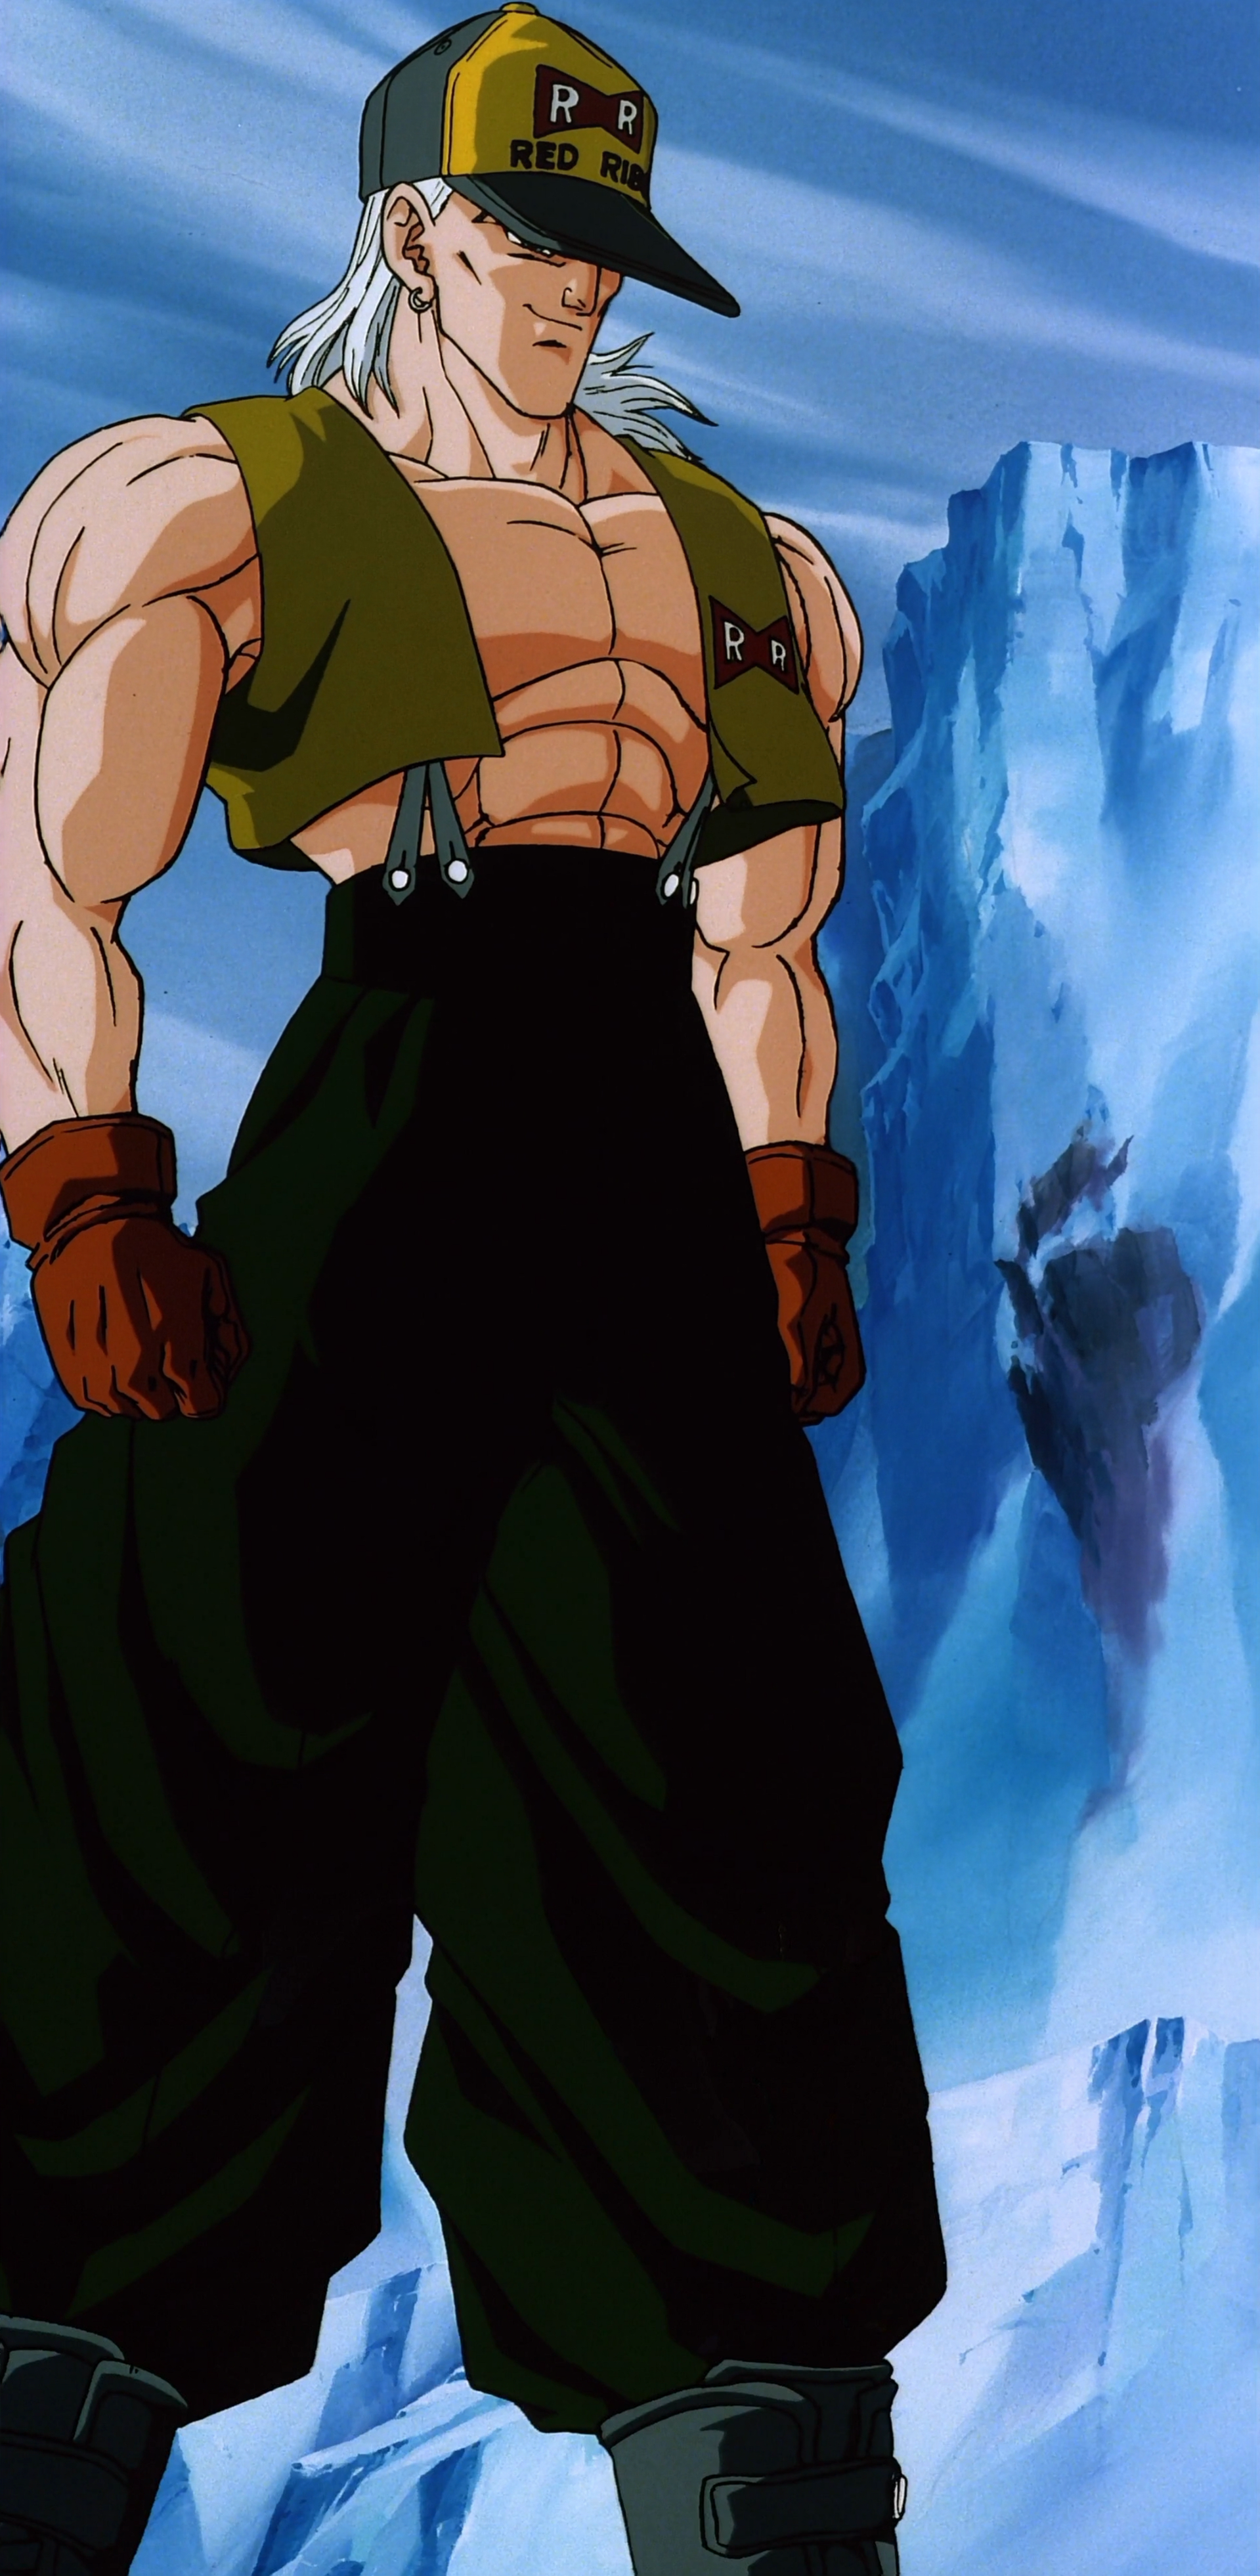 Android 13 | Dragon Ball Wiki | FANDOM powered by Wikia